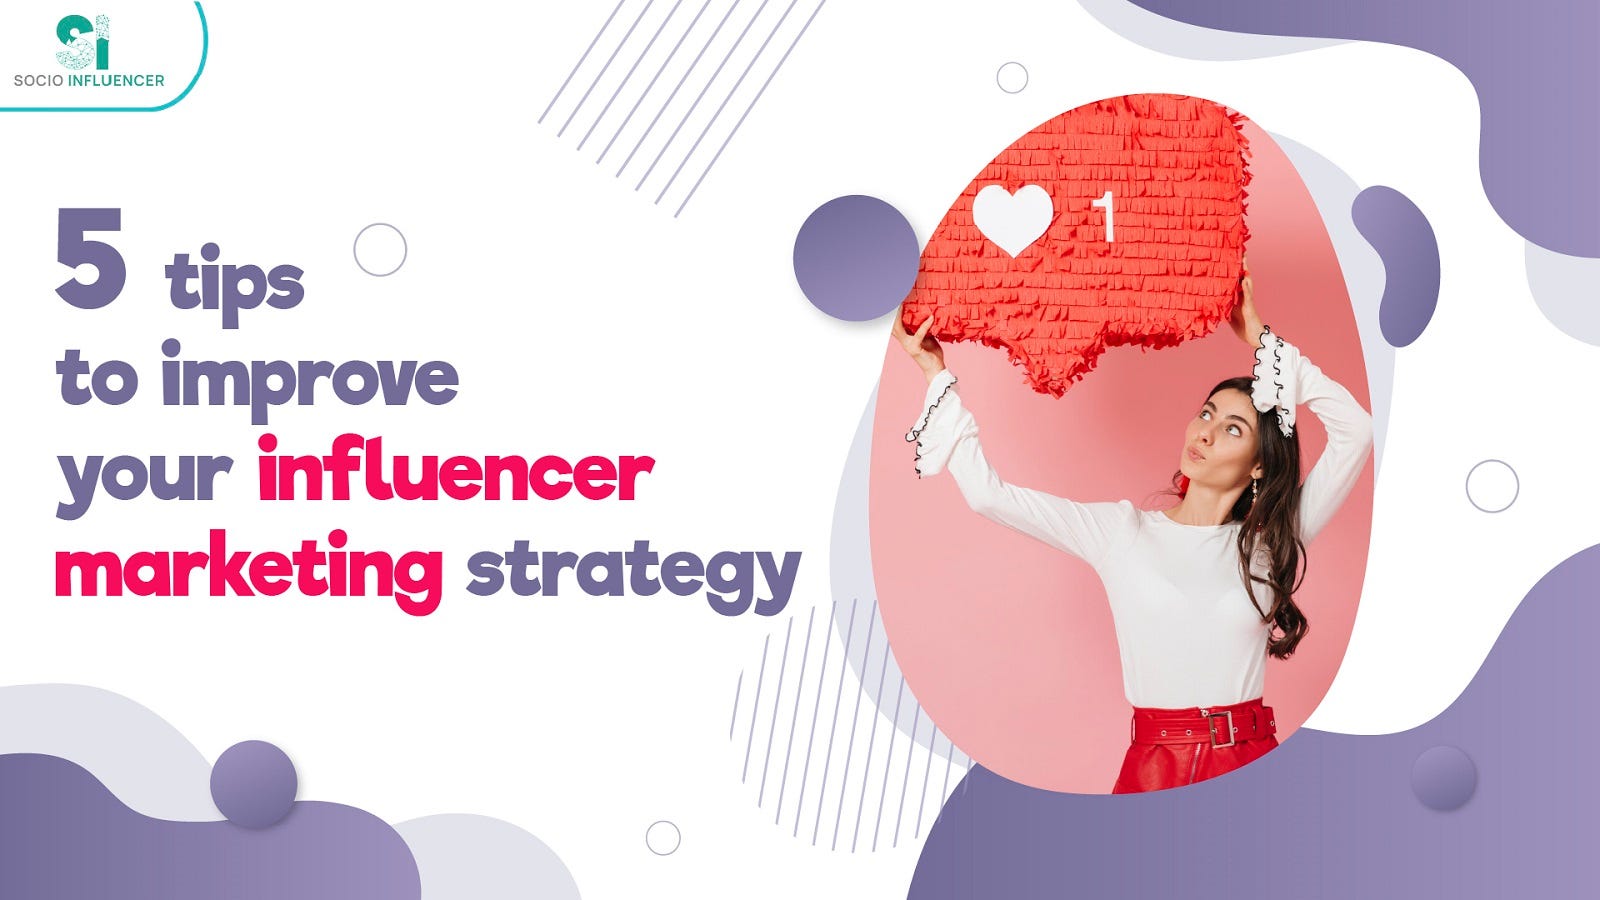 5 Tips to Improve Your Influencer Marketing Strategy